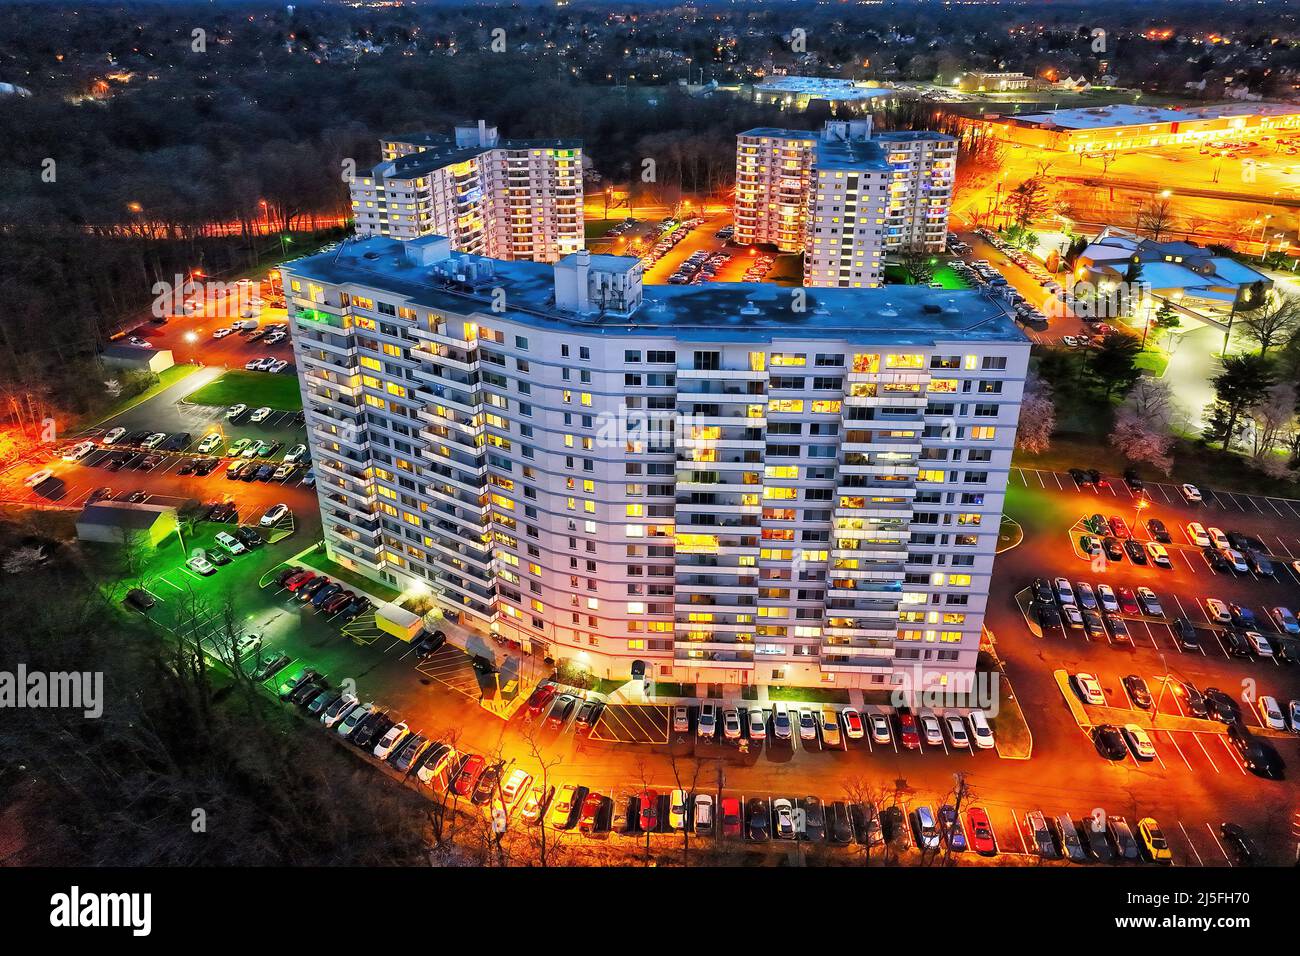 Aerial View of an Apartment Complex at Night Stock Photo